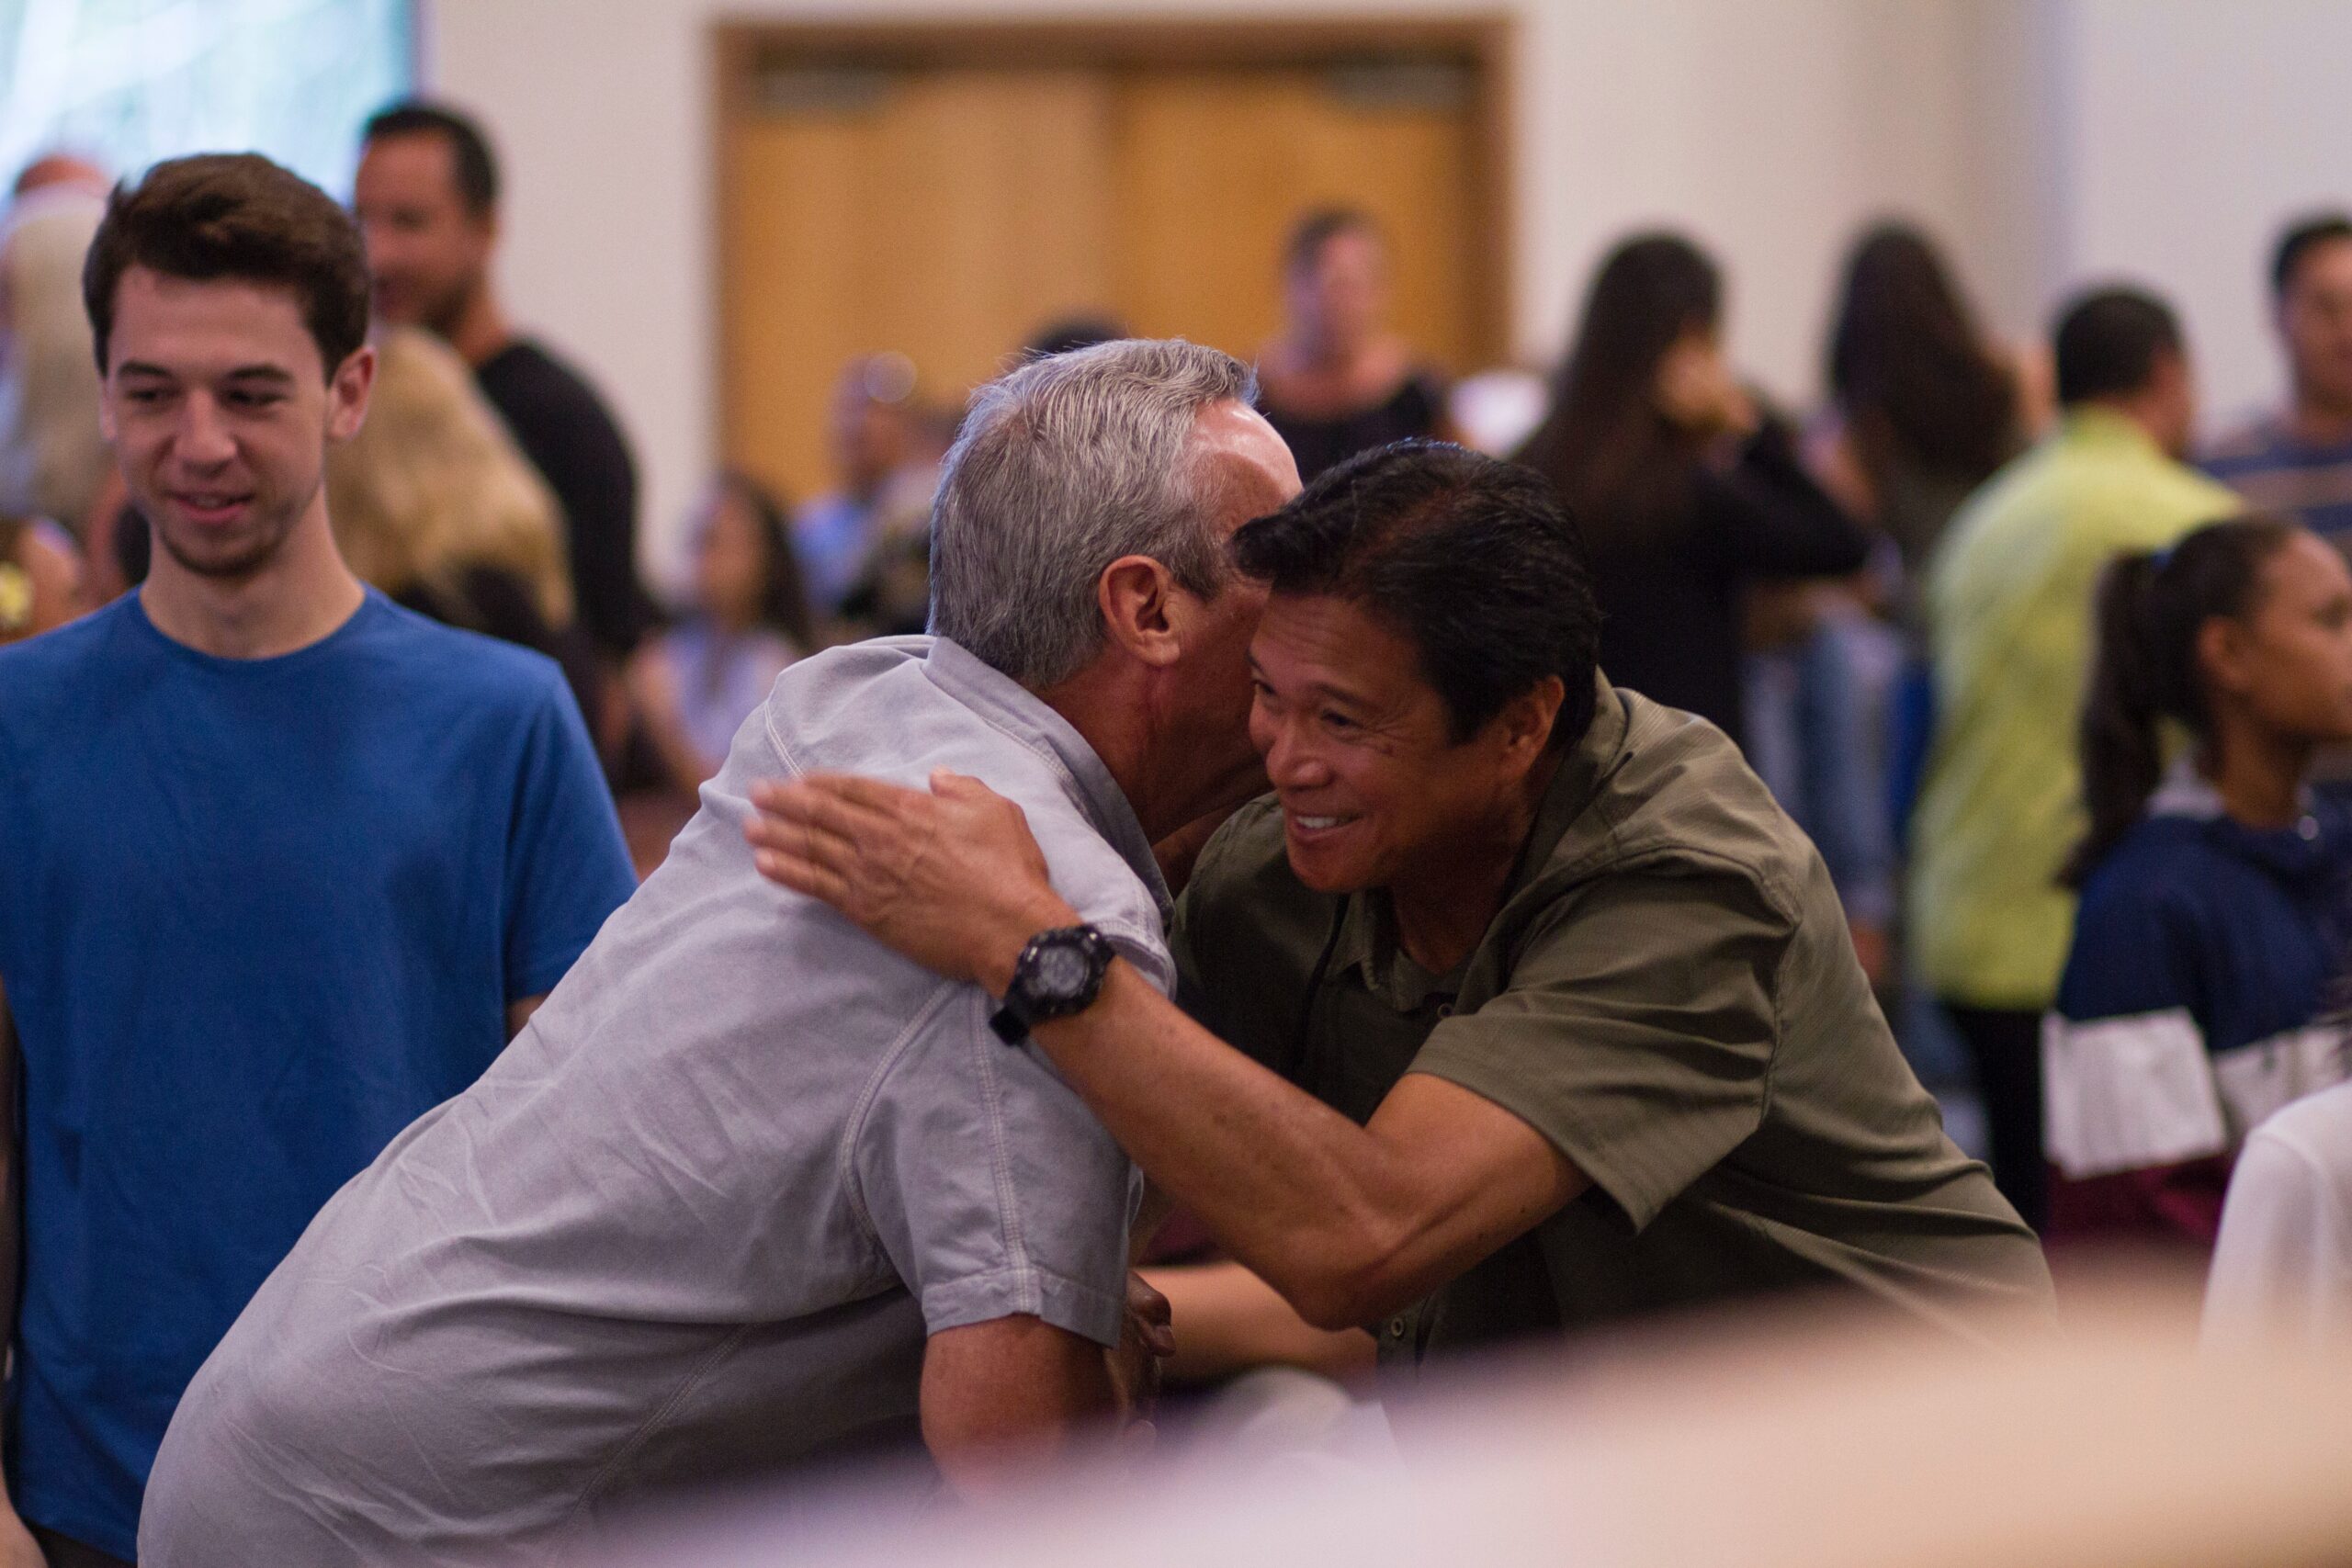 Two men embrace and share a conversation with each other at a community center.